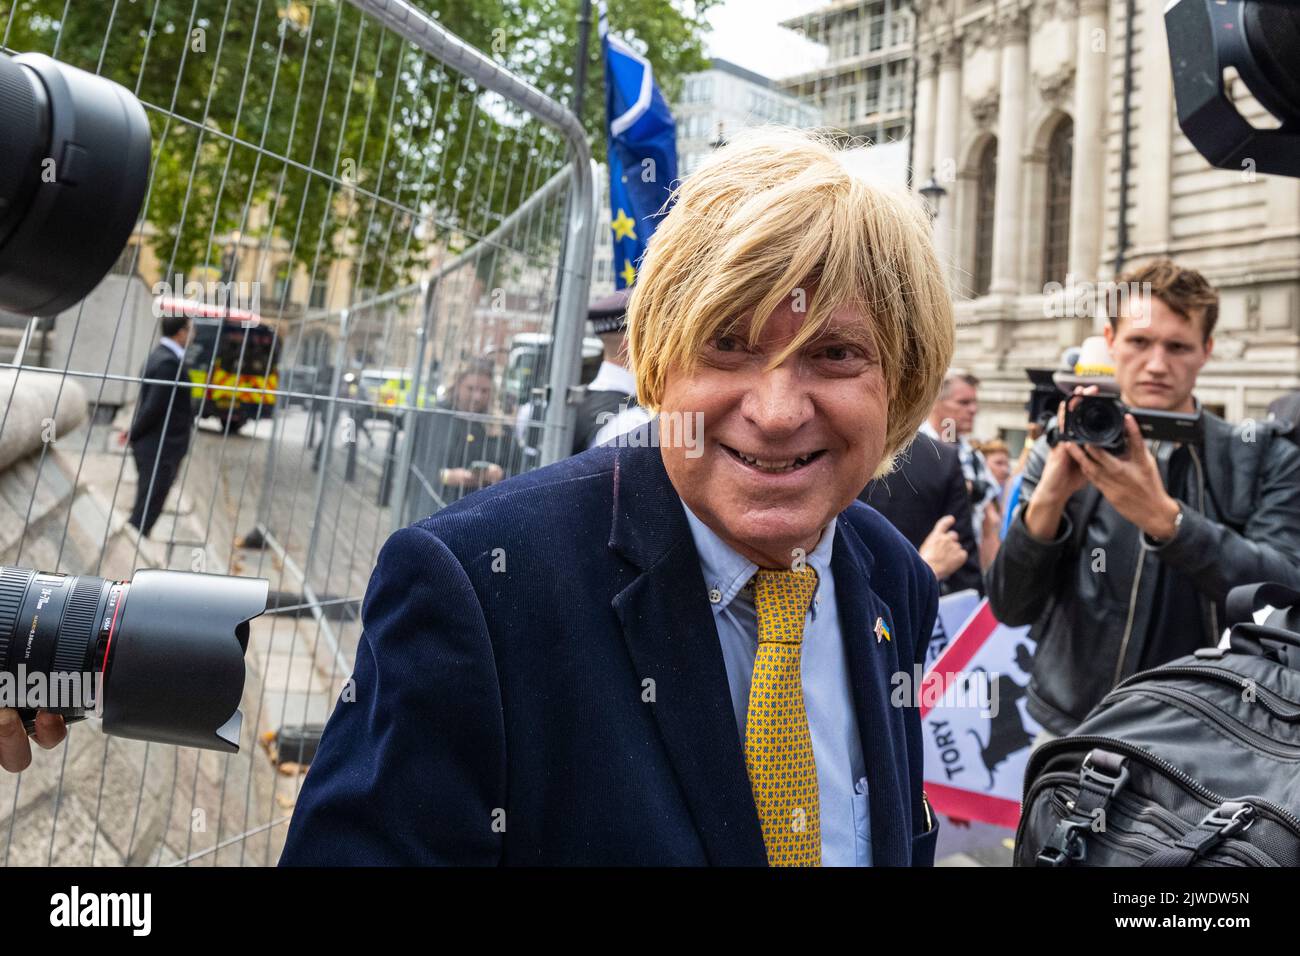 London, UK.  5 September 2022. Michael Fabricant arrives at the Queen Elizabeth II centre in Westminster ahead of Liz Truss being announced as the new leader of the Conservative Party and Prime Minister after Boris Johnson resigned. Credit: Stephen Chung / Alamy Live News Stock Photo